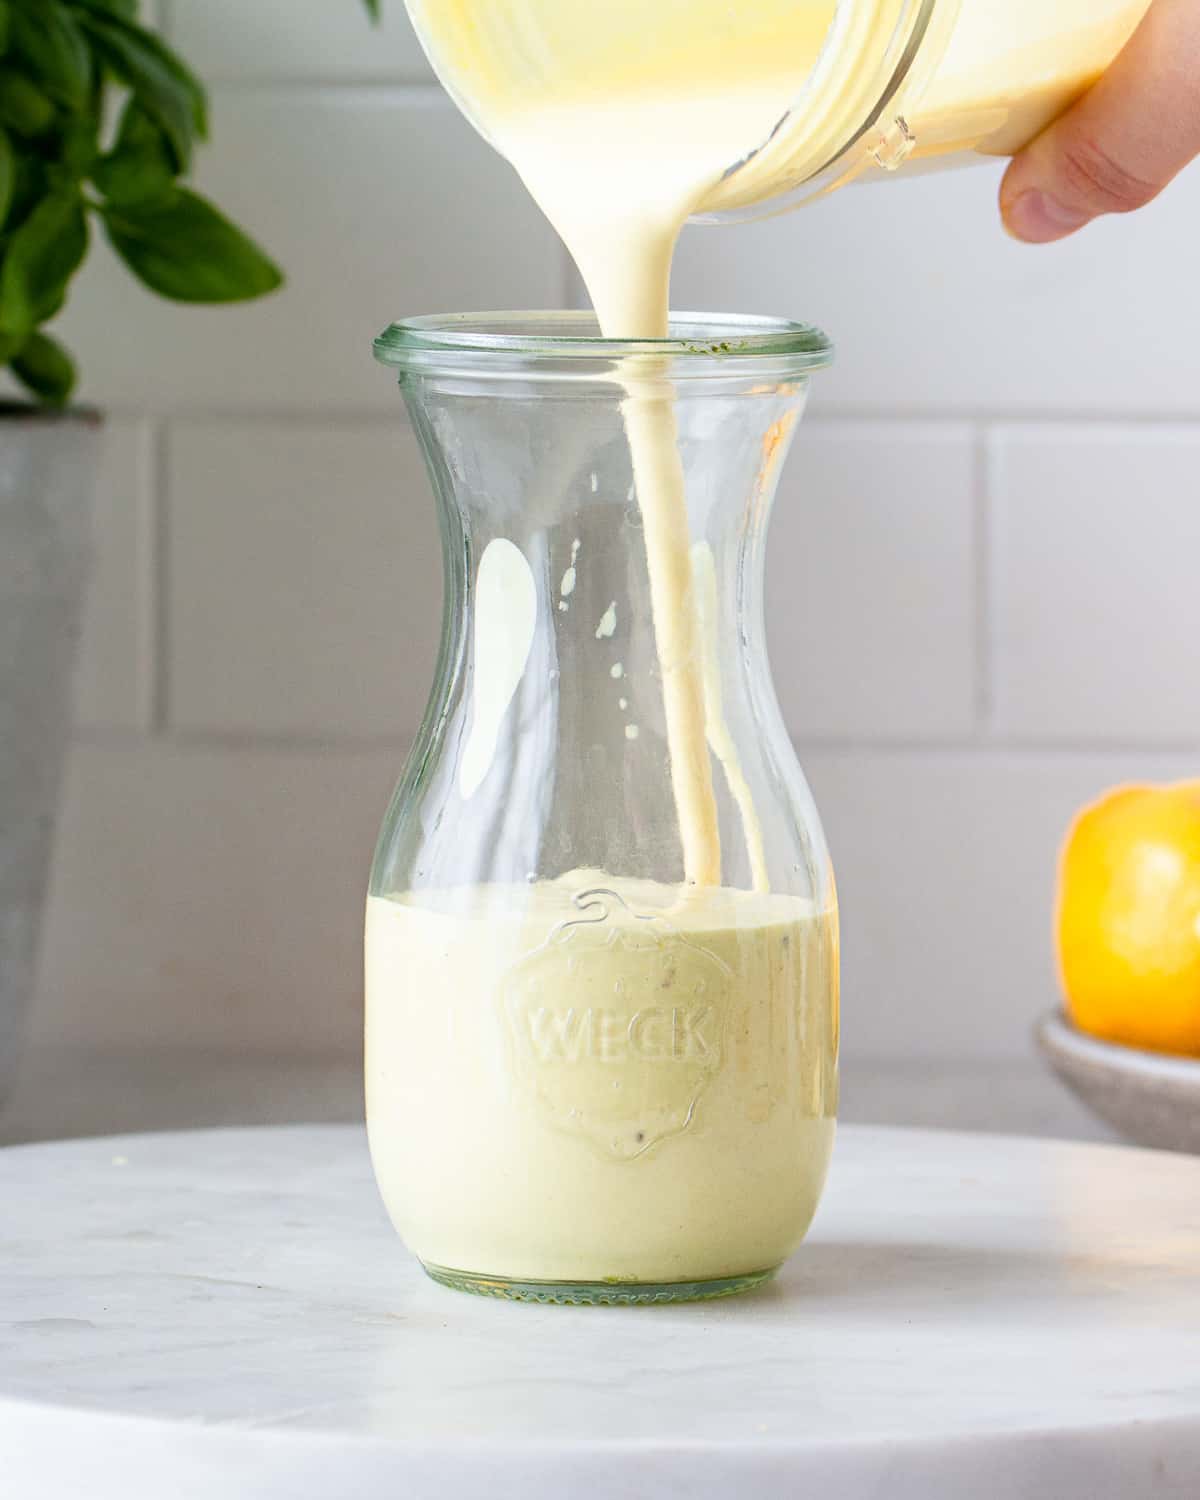 Hand pouring a creamy, light yellow salad dressing into a small glass jar.